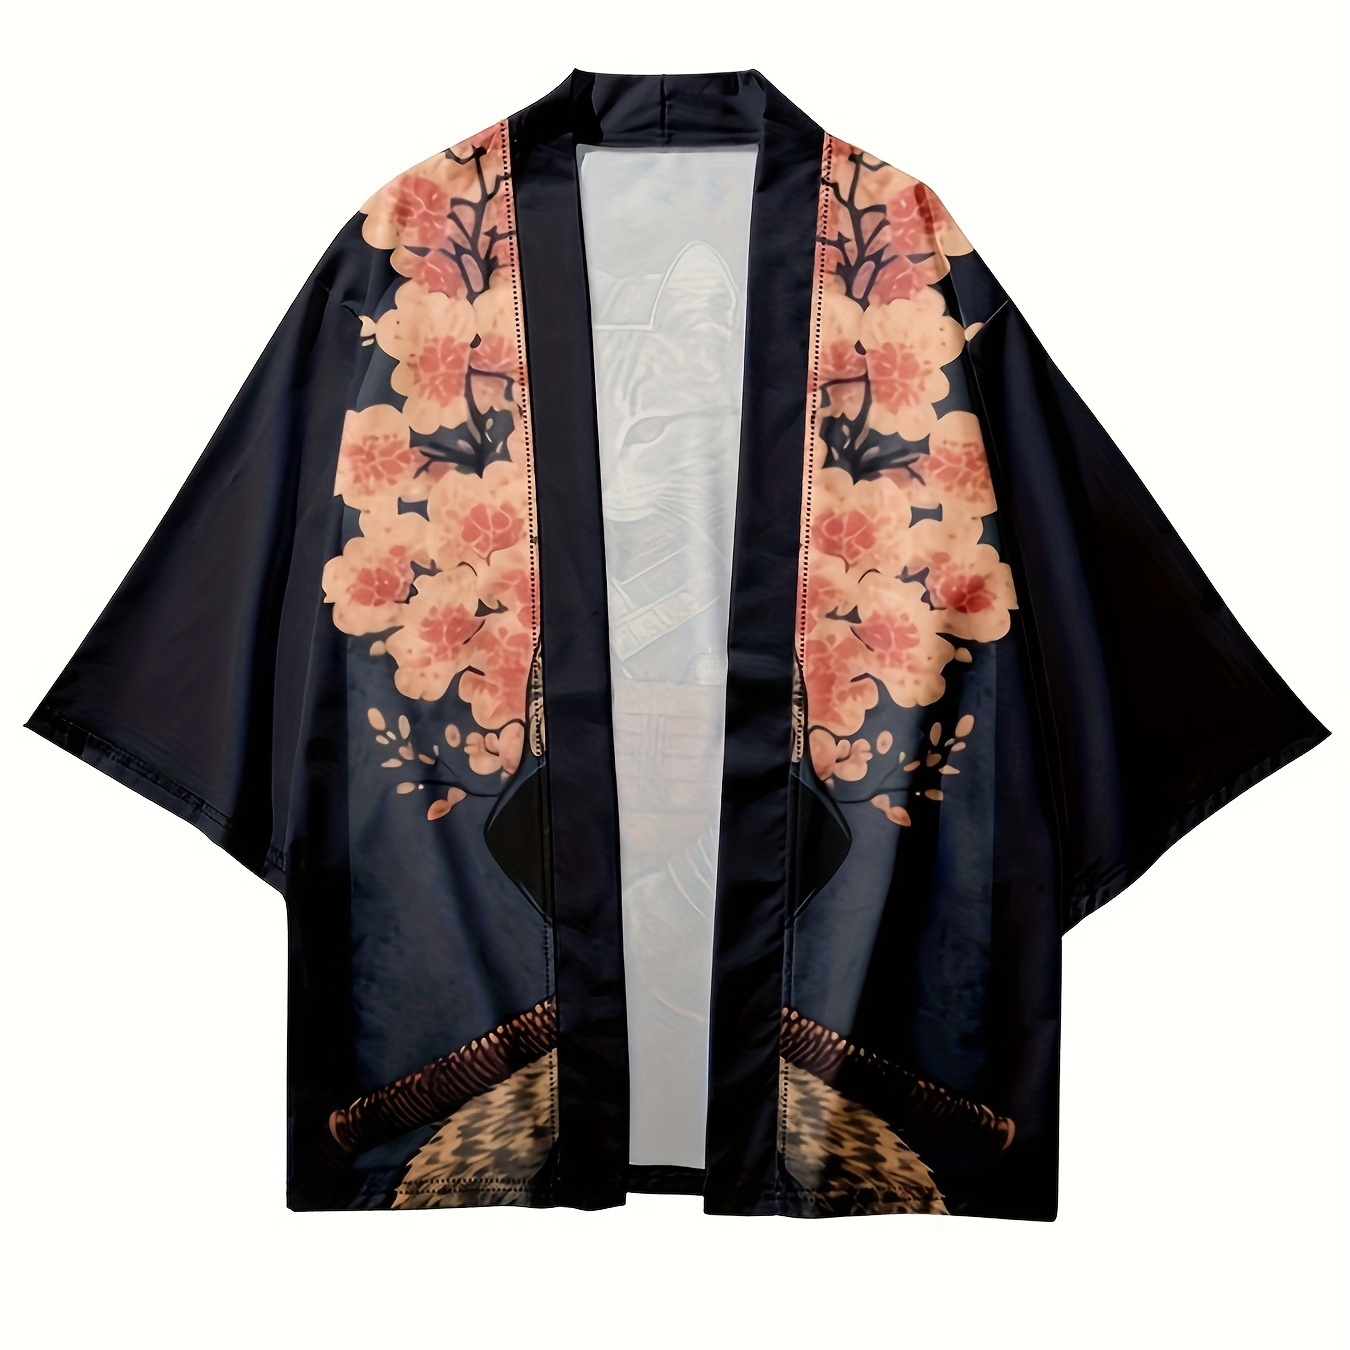 

Anime Cat And Flower Pattern Men's Creative Graphic Kimono, Men's Spring Summer Cardigan For Holiday